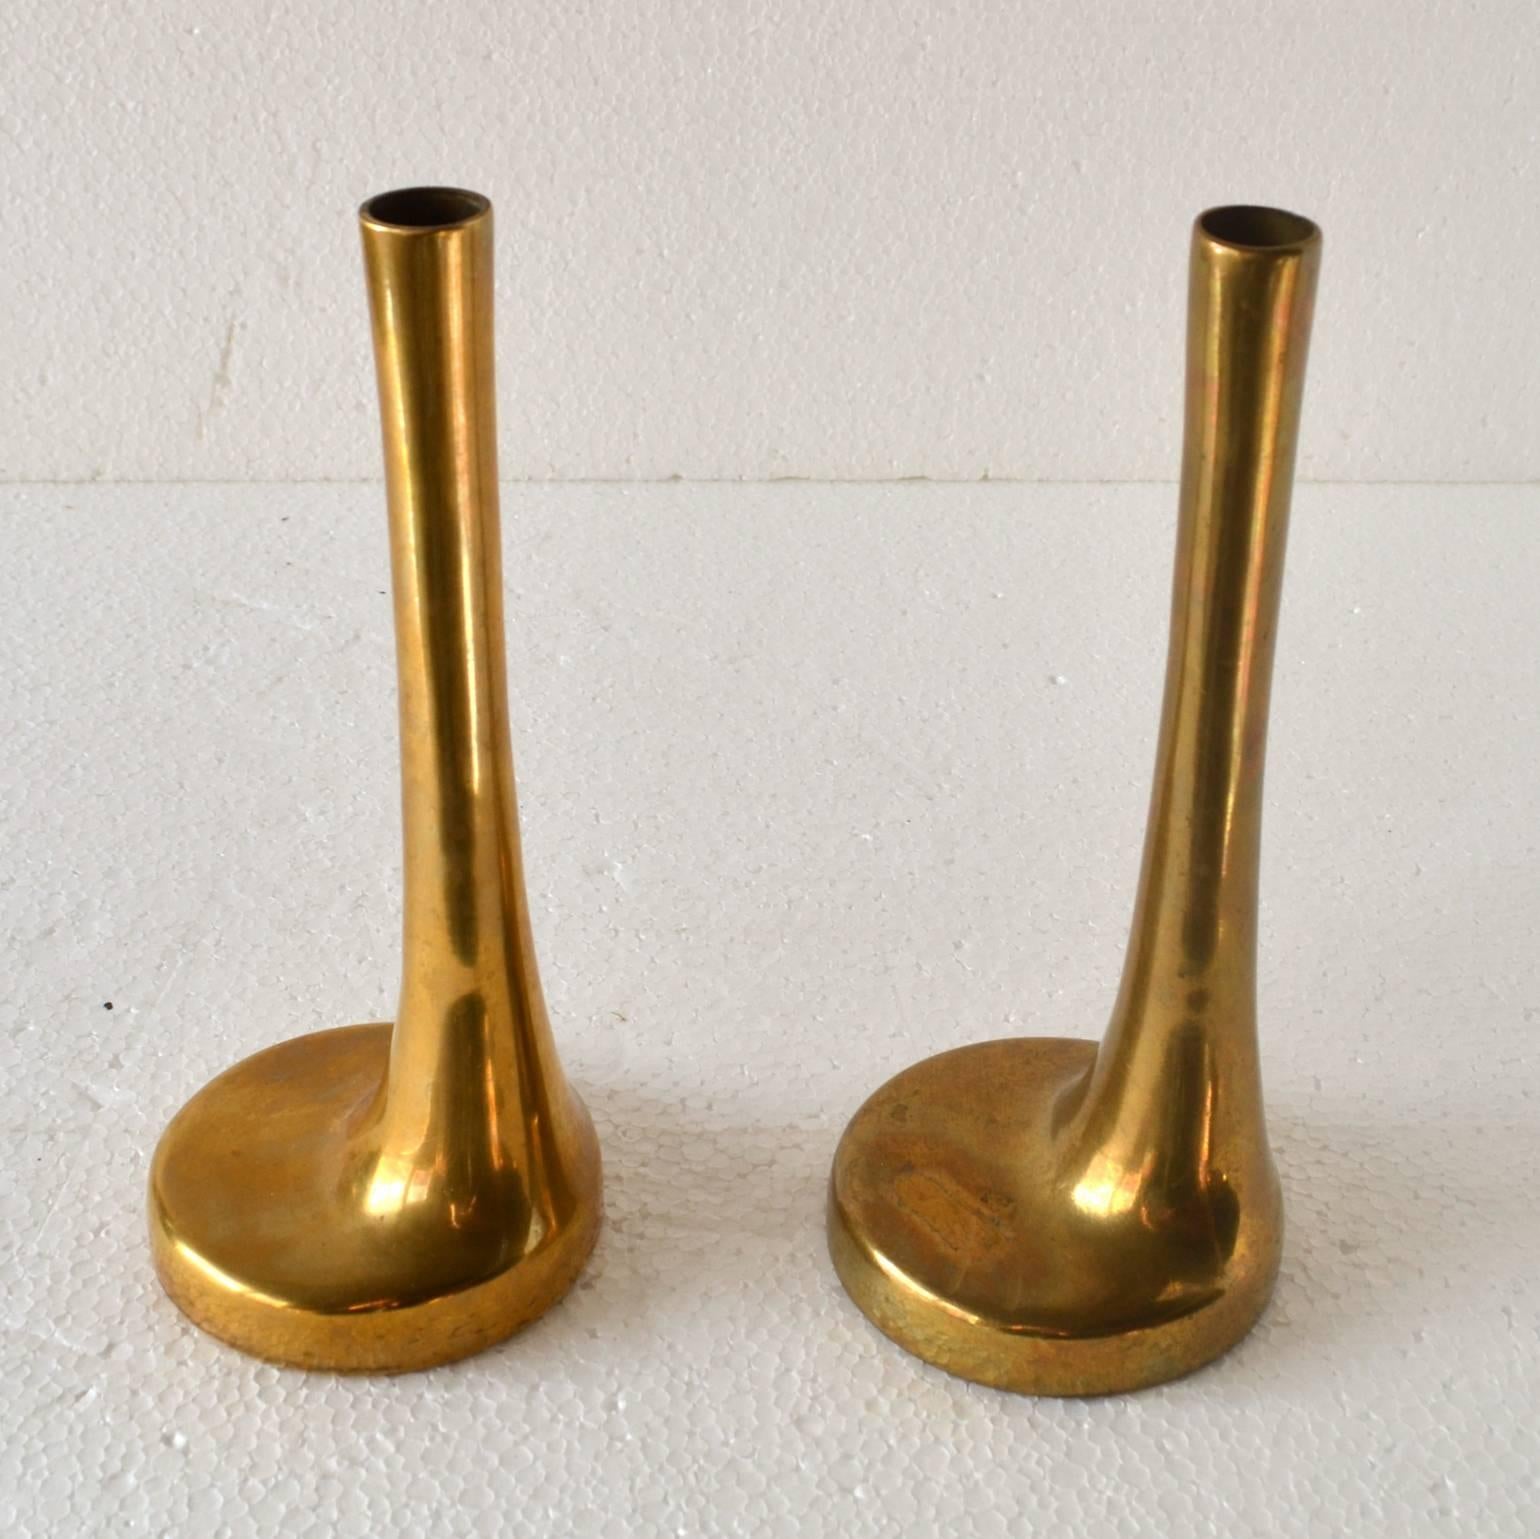 Two brass cast single flower vases pair made in Italy, 1970s and marked with a label.